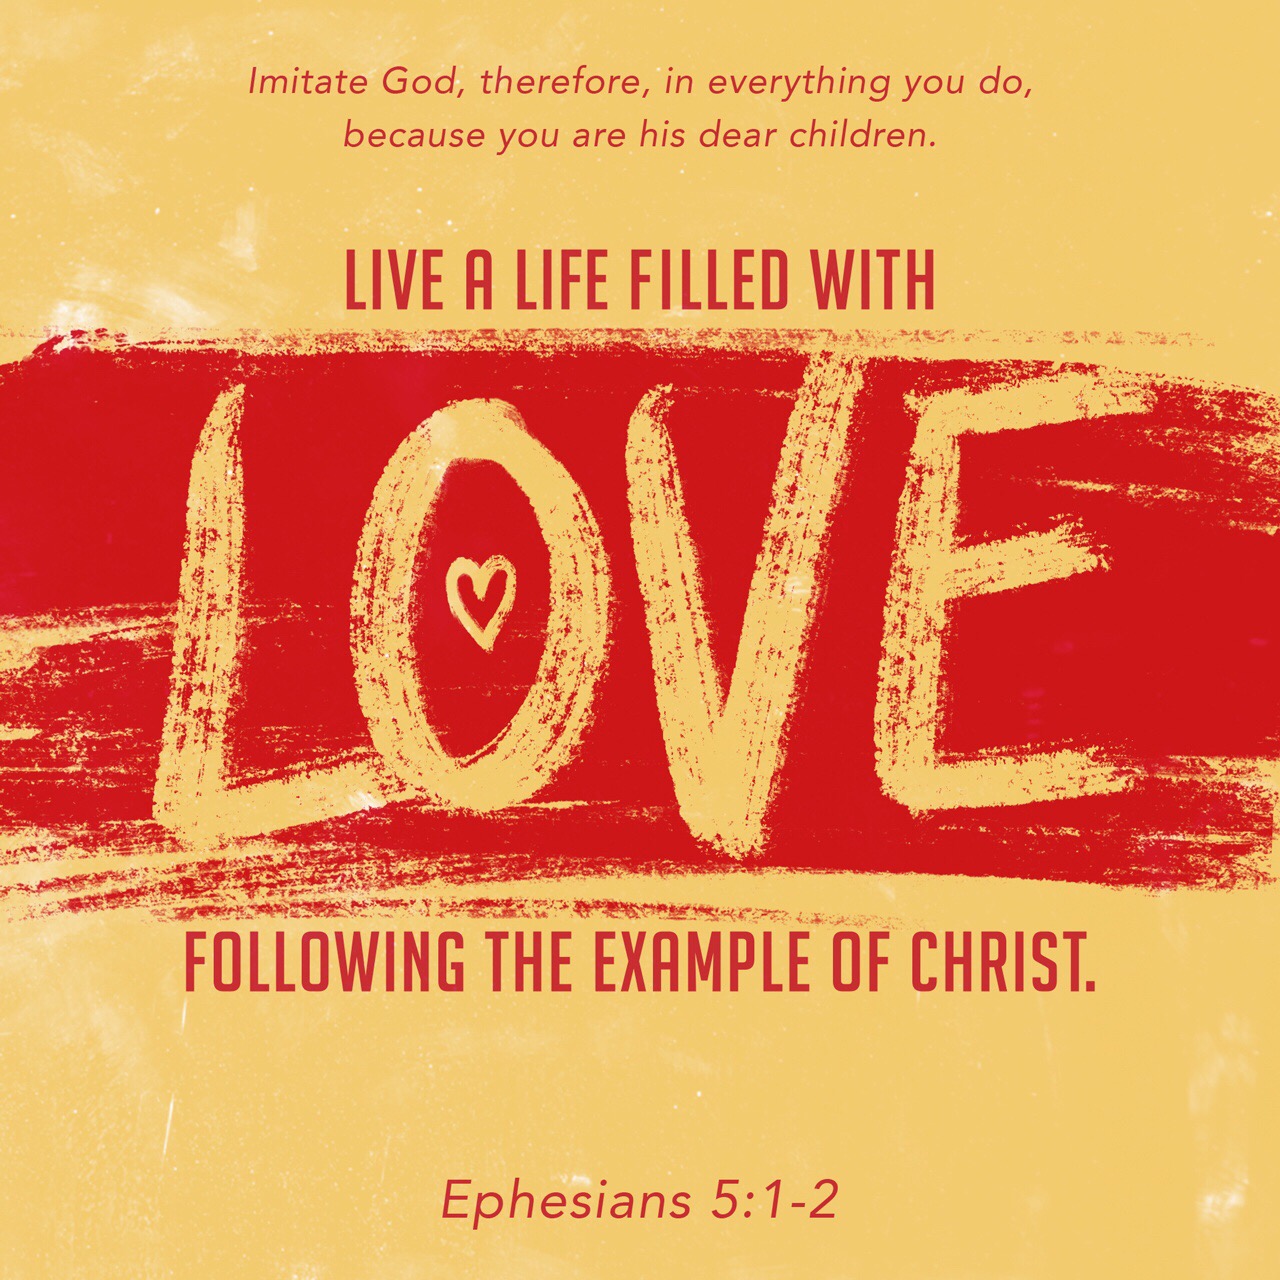 VOTD August 3 - Therefore be imitators of God, as beloved children; and walk in love, just as Christ also loved you and gave Himself up for us, an offering and a sacrifice to God as a fragrant aroma. Ephesians 5:1-2 NASB